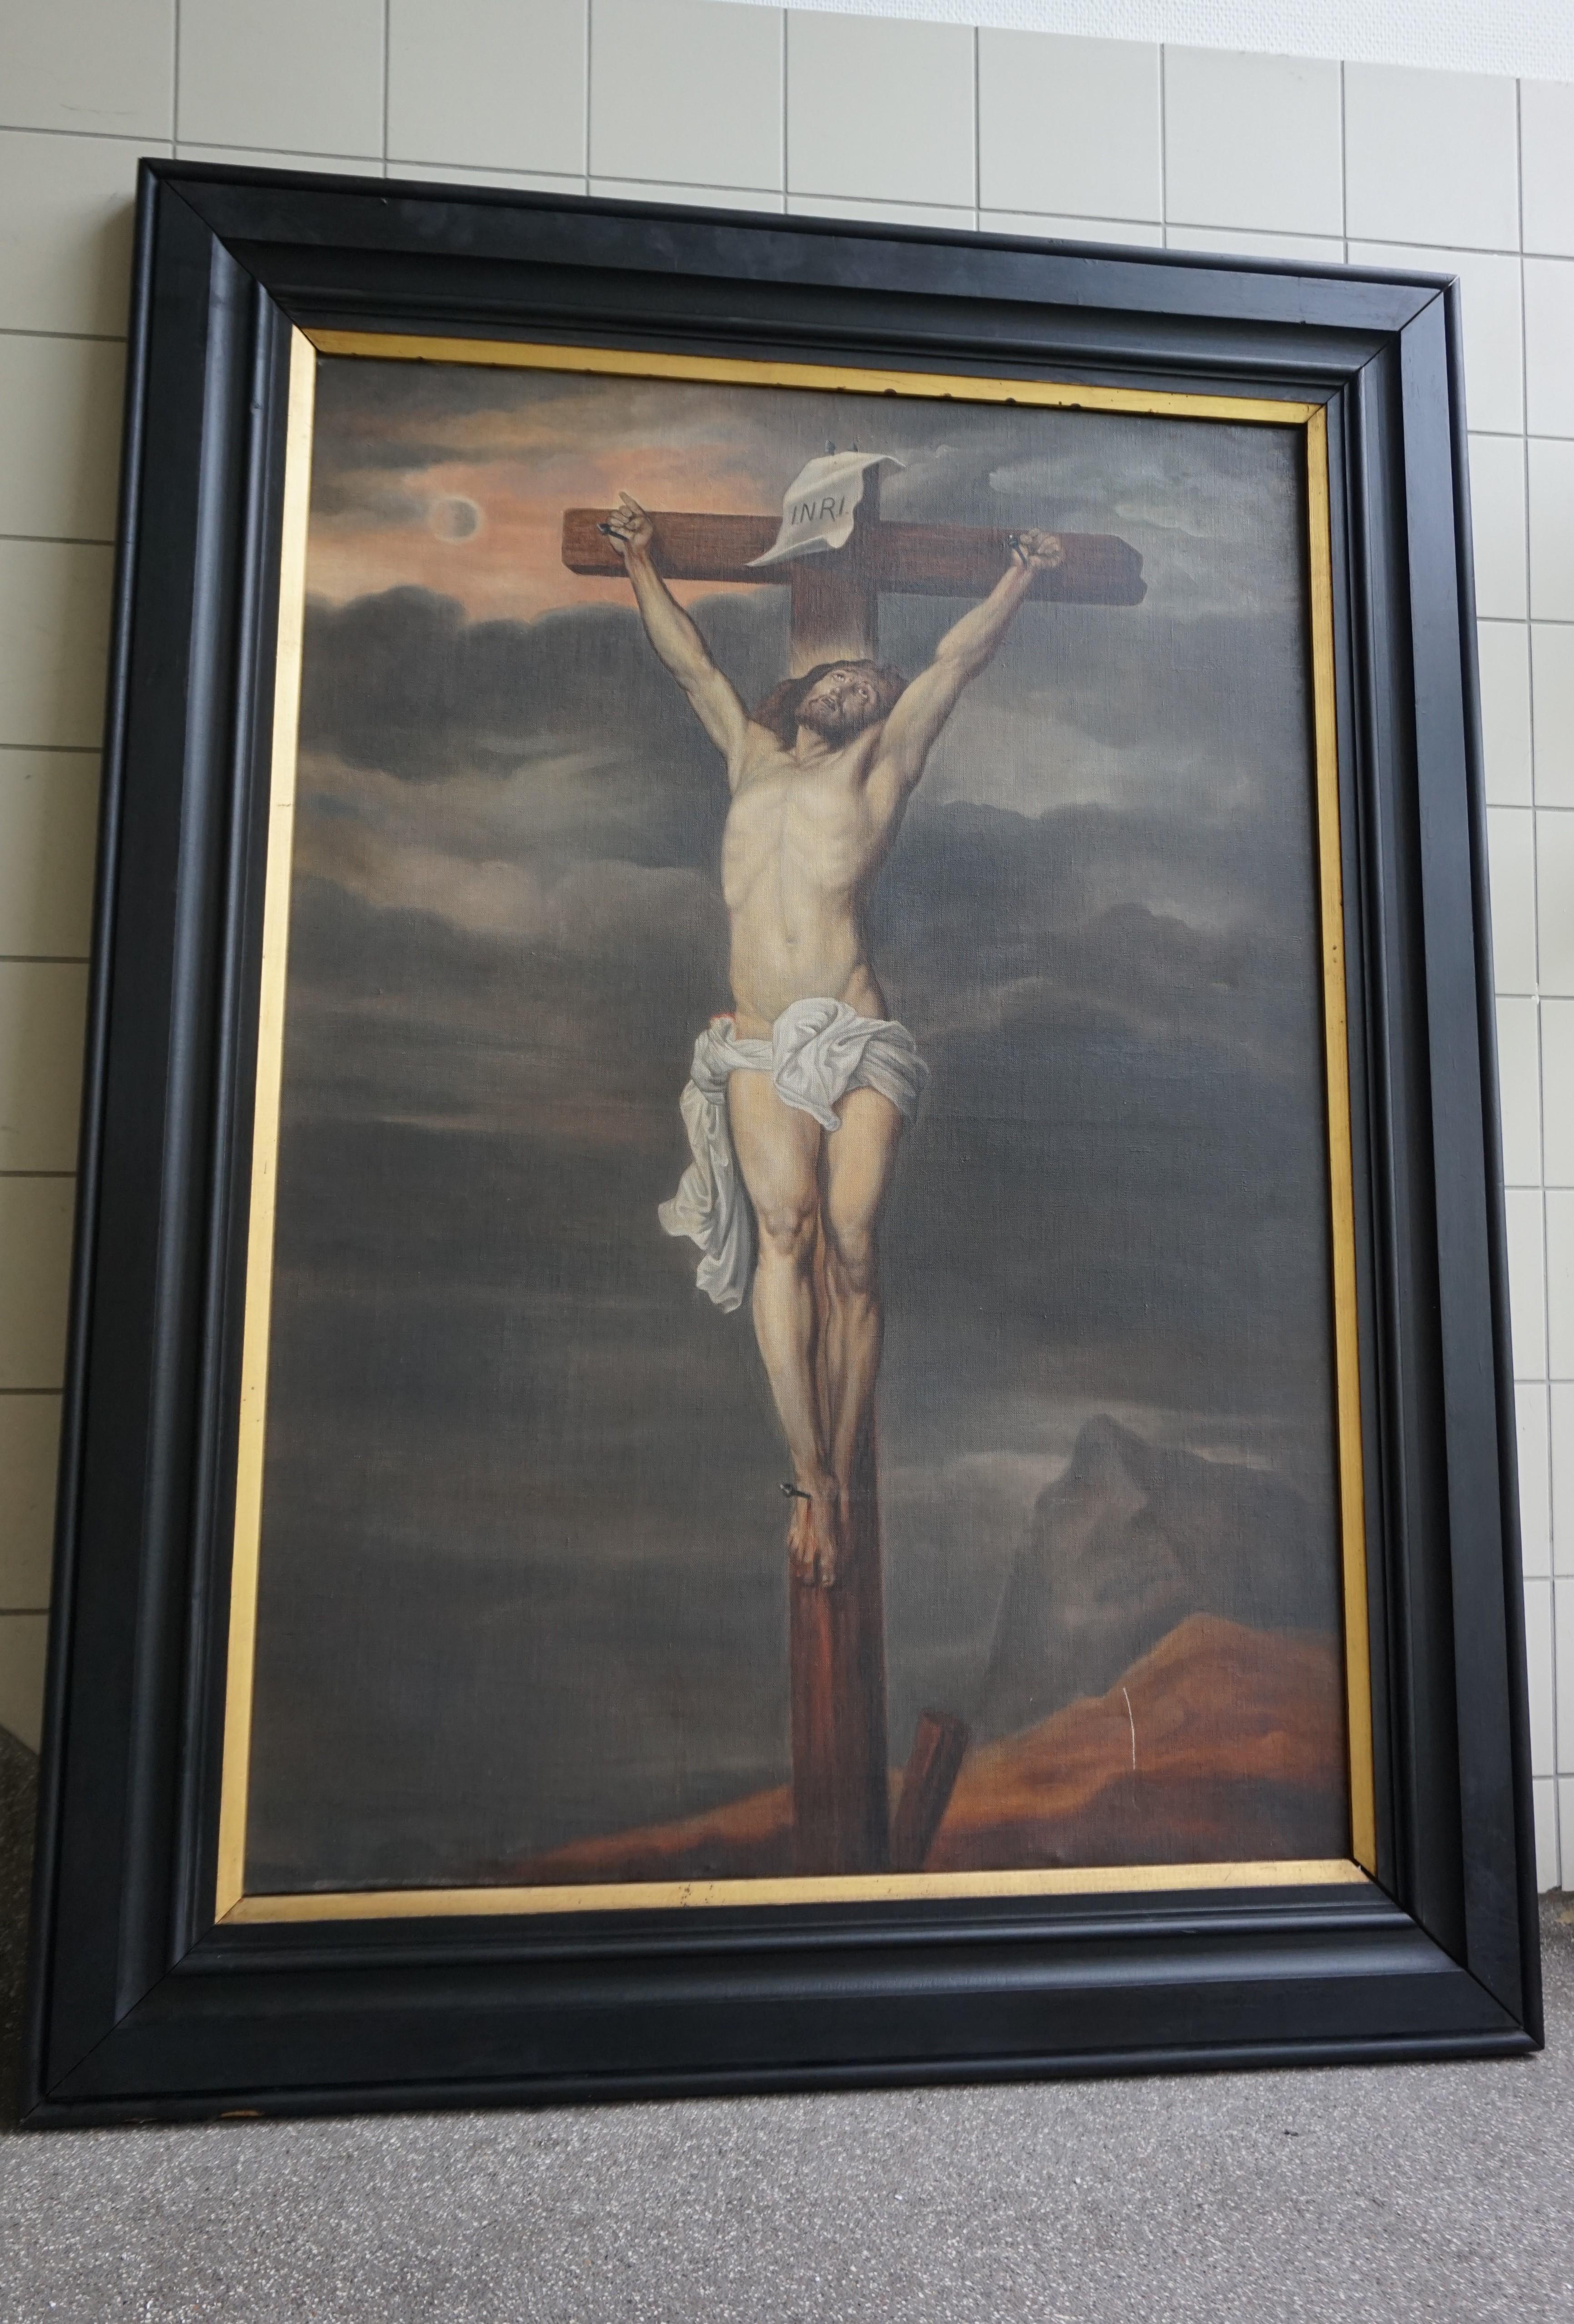 Marvellous work of religious art.

This striking and sizeable painting of Christ on the cross is an impressive sight to see and for more reasons than one. The incredibly well painted, pale body of Christ contrasting strongly against the dark and